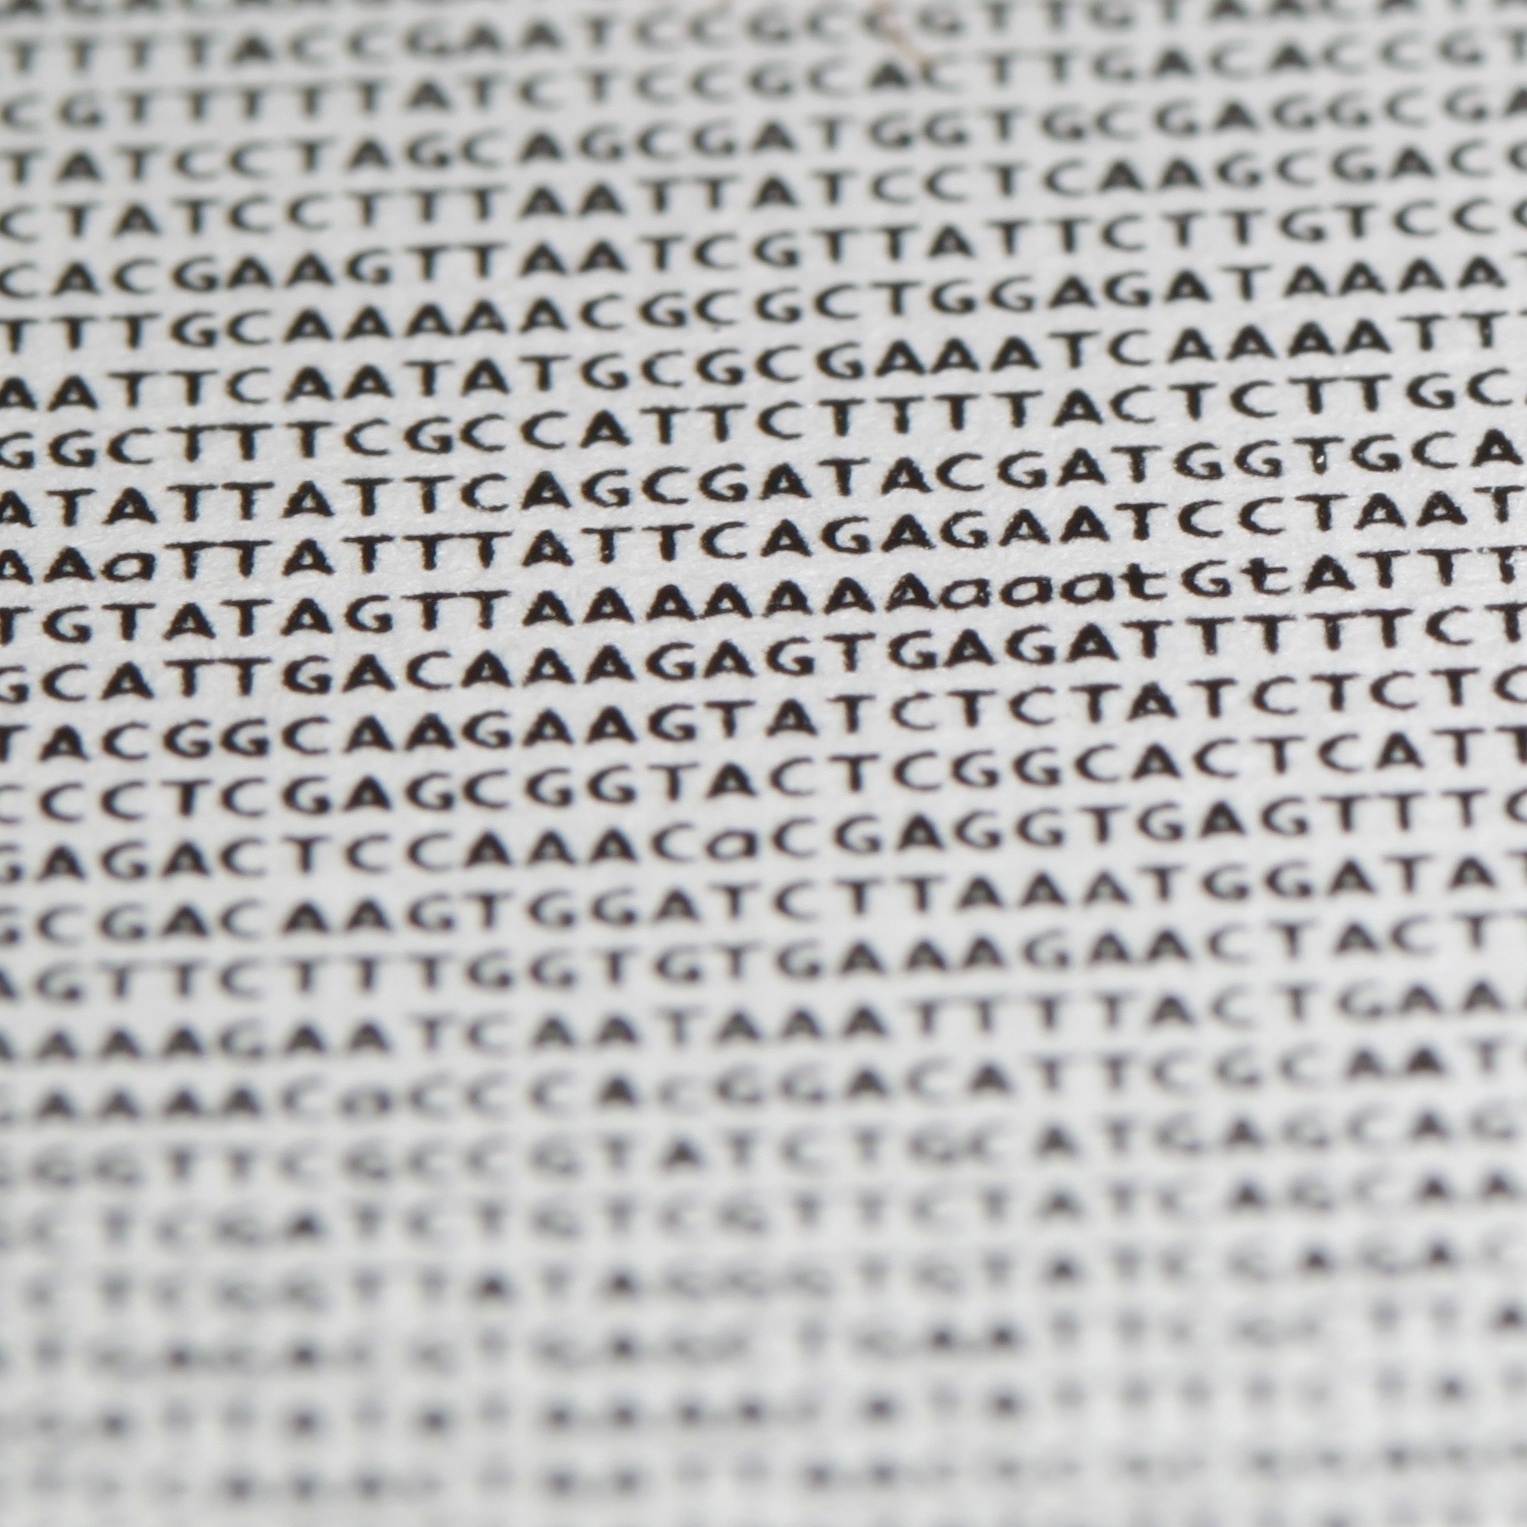 Analysis of genome sequence